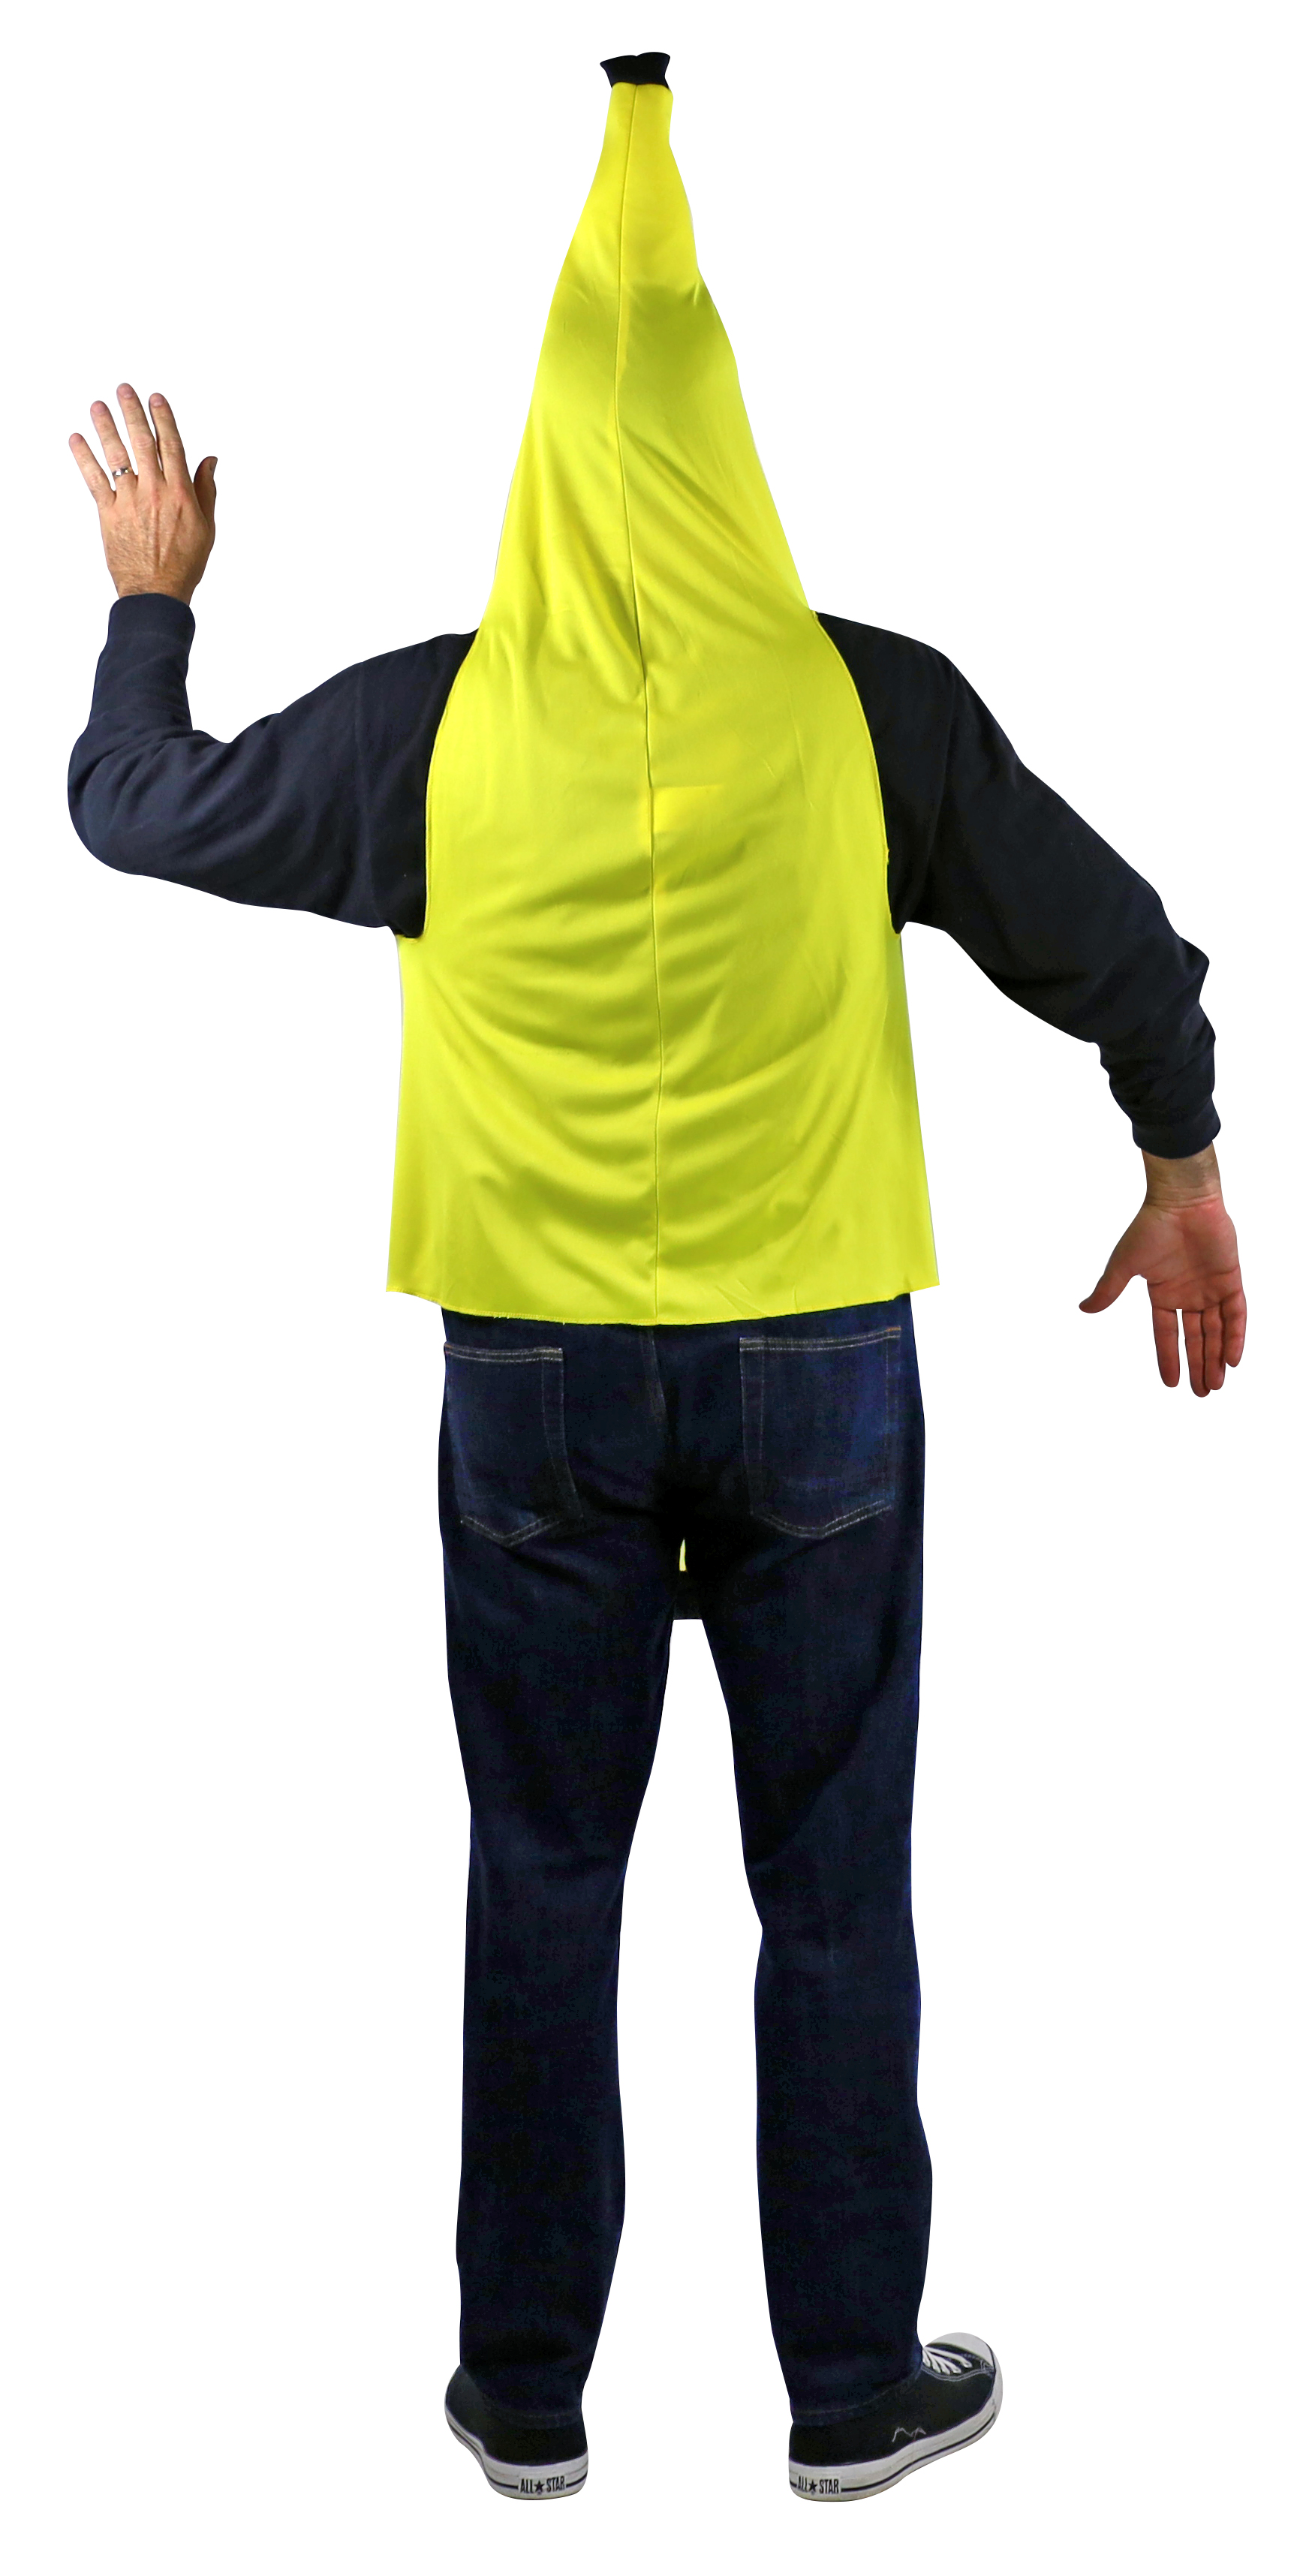 Banana Tunic Halloween Costume for Adults, Mens One Size Fit , by Rasta Imposta - image 4 of 5